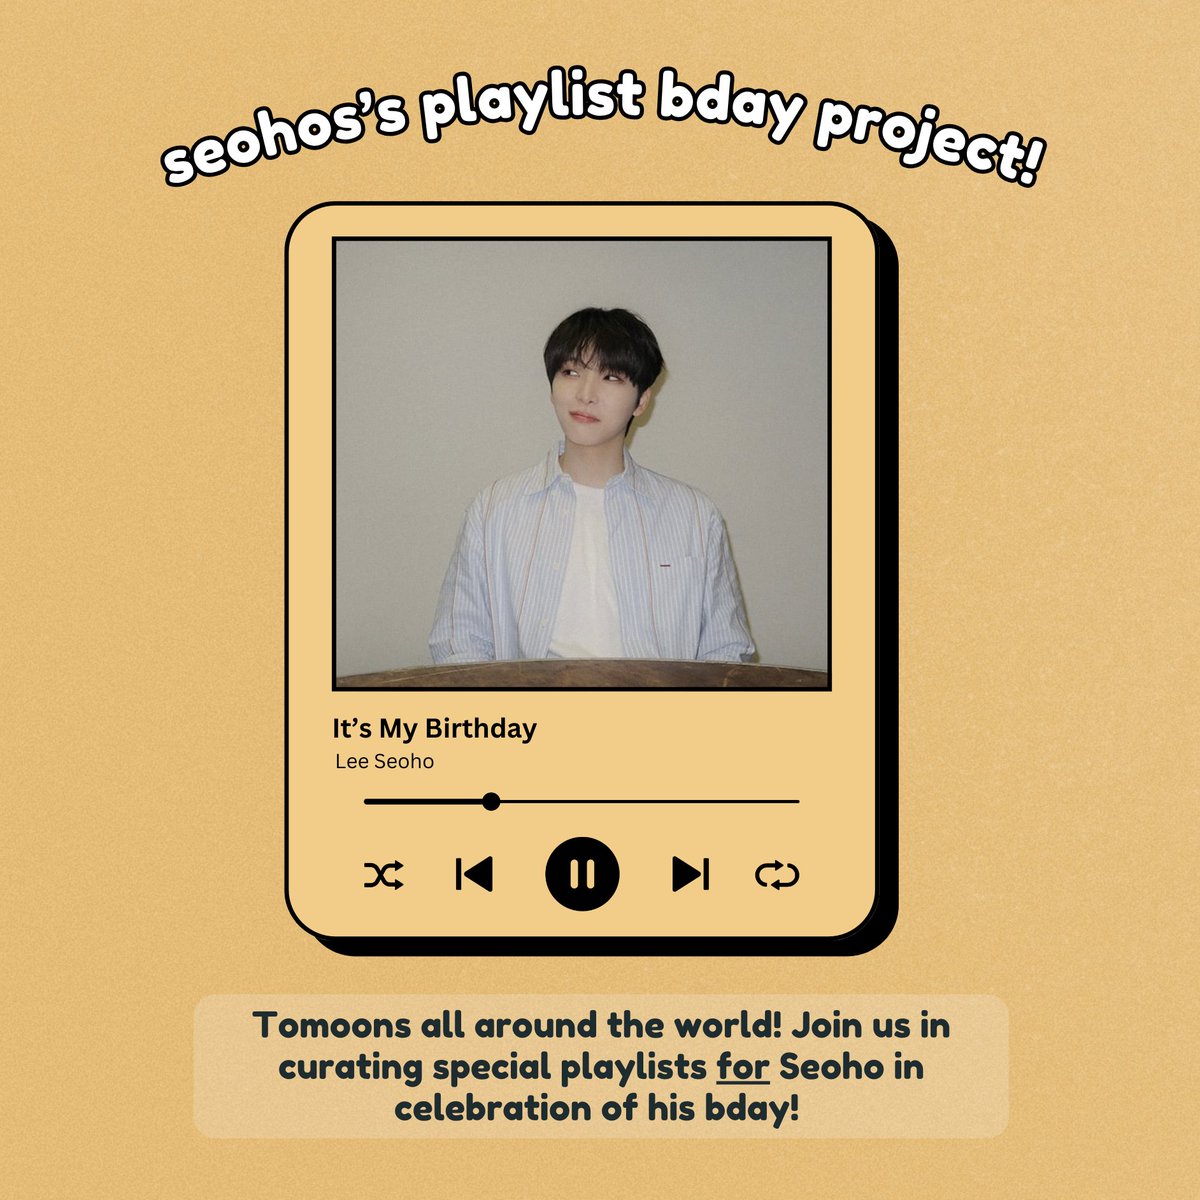 🧡SEOHO BDAY PROJECT 🧡 to. seoho, from. tomoon With Seoho's birthday coming up, we're happy to announce our birthday playlist project! Compiled by us, curated by you, created with Seoho in mind. 🔗 tinyurl.com/seohoplaylist — a @milkyumoon @yeowoongs collab #SongsForSeoho